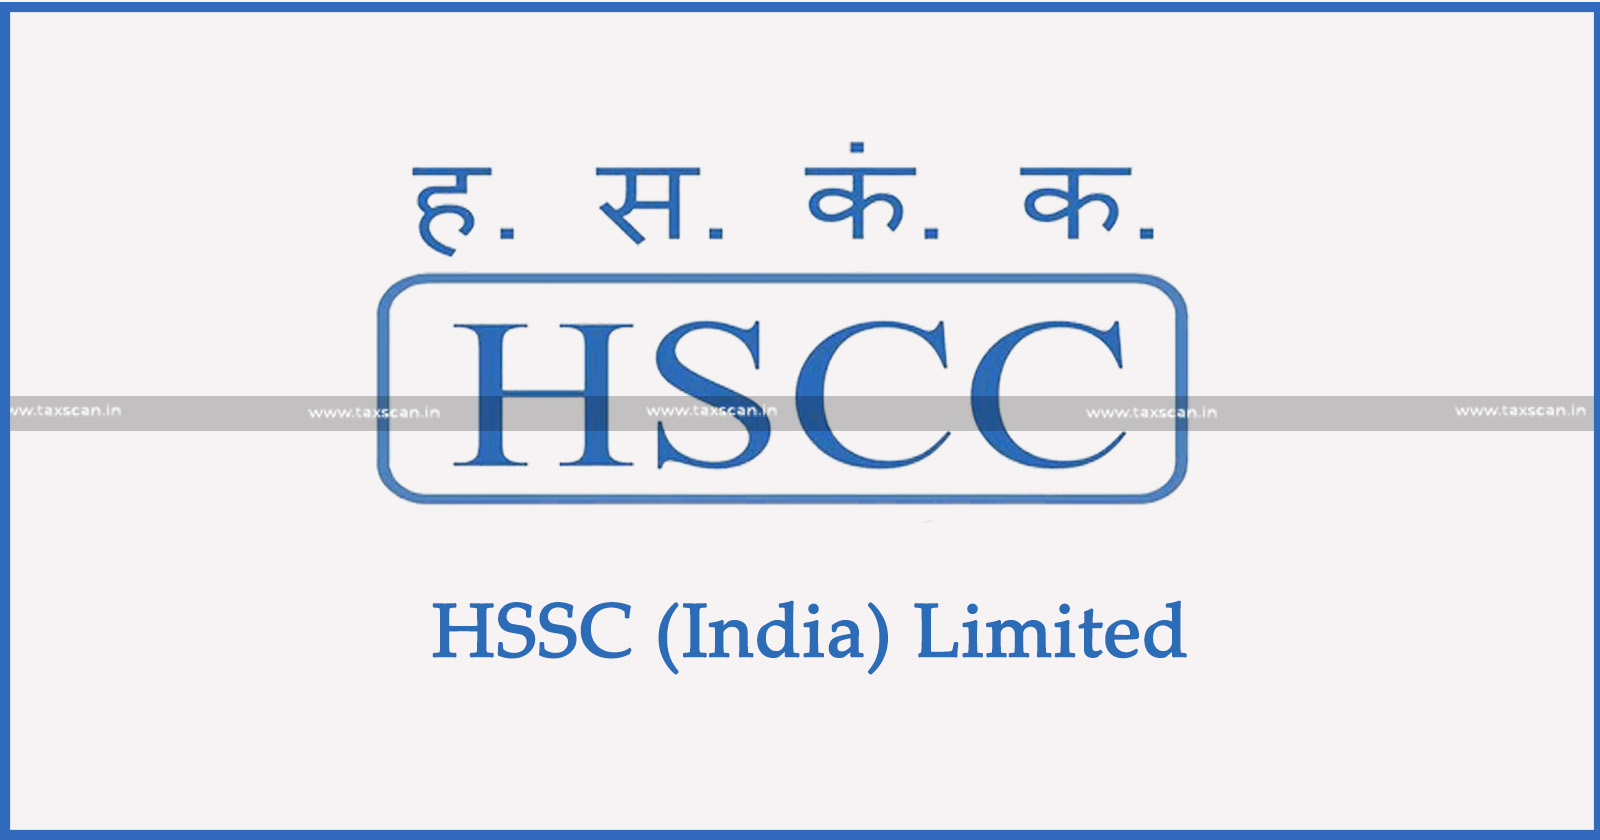 HSCC (India) Limited -Opportunity Alert - 24 Vacancies for Assistant Manager at HSCC - jobscan